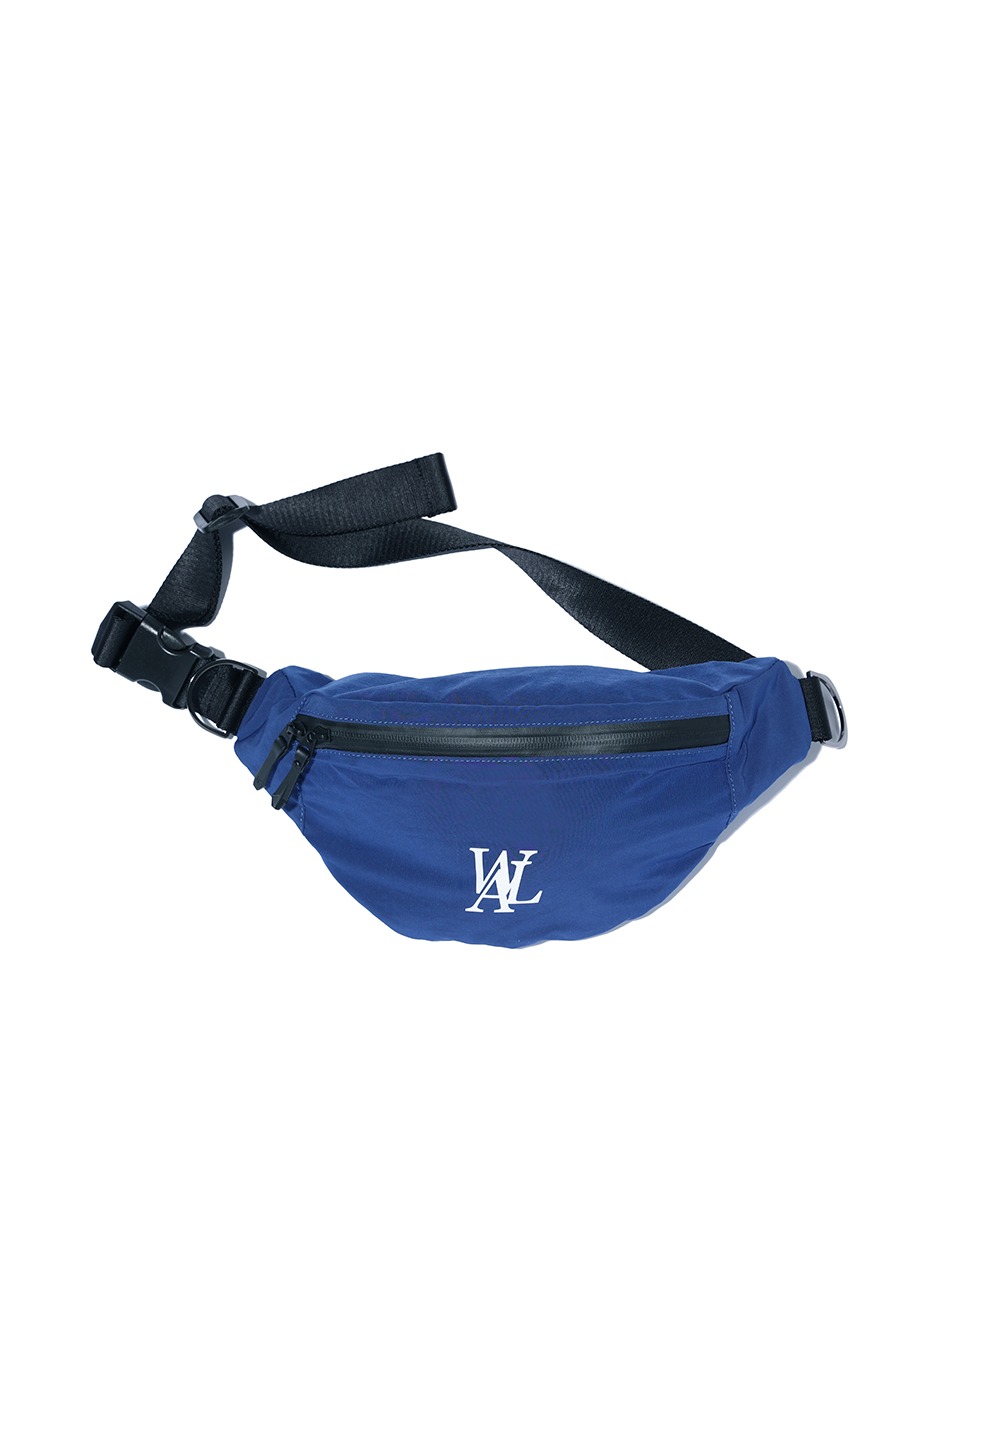 Fanny pack - BLUE